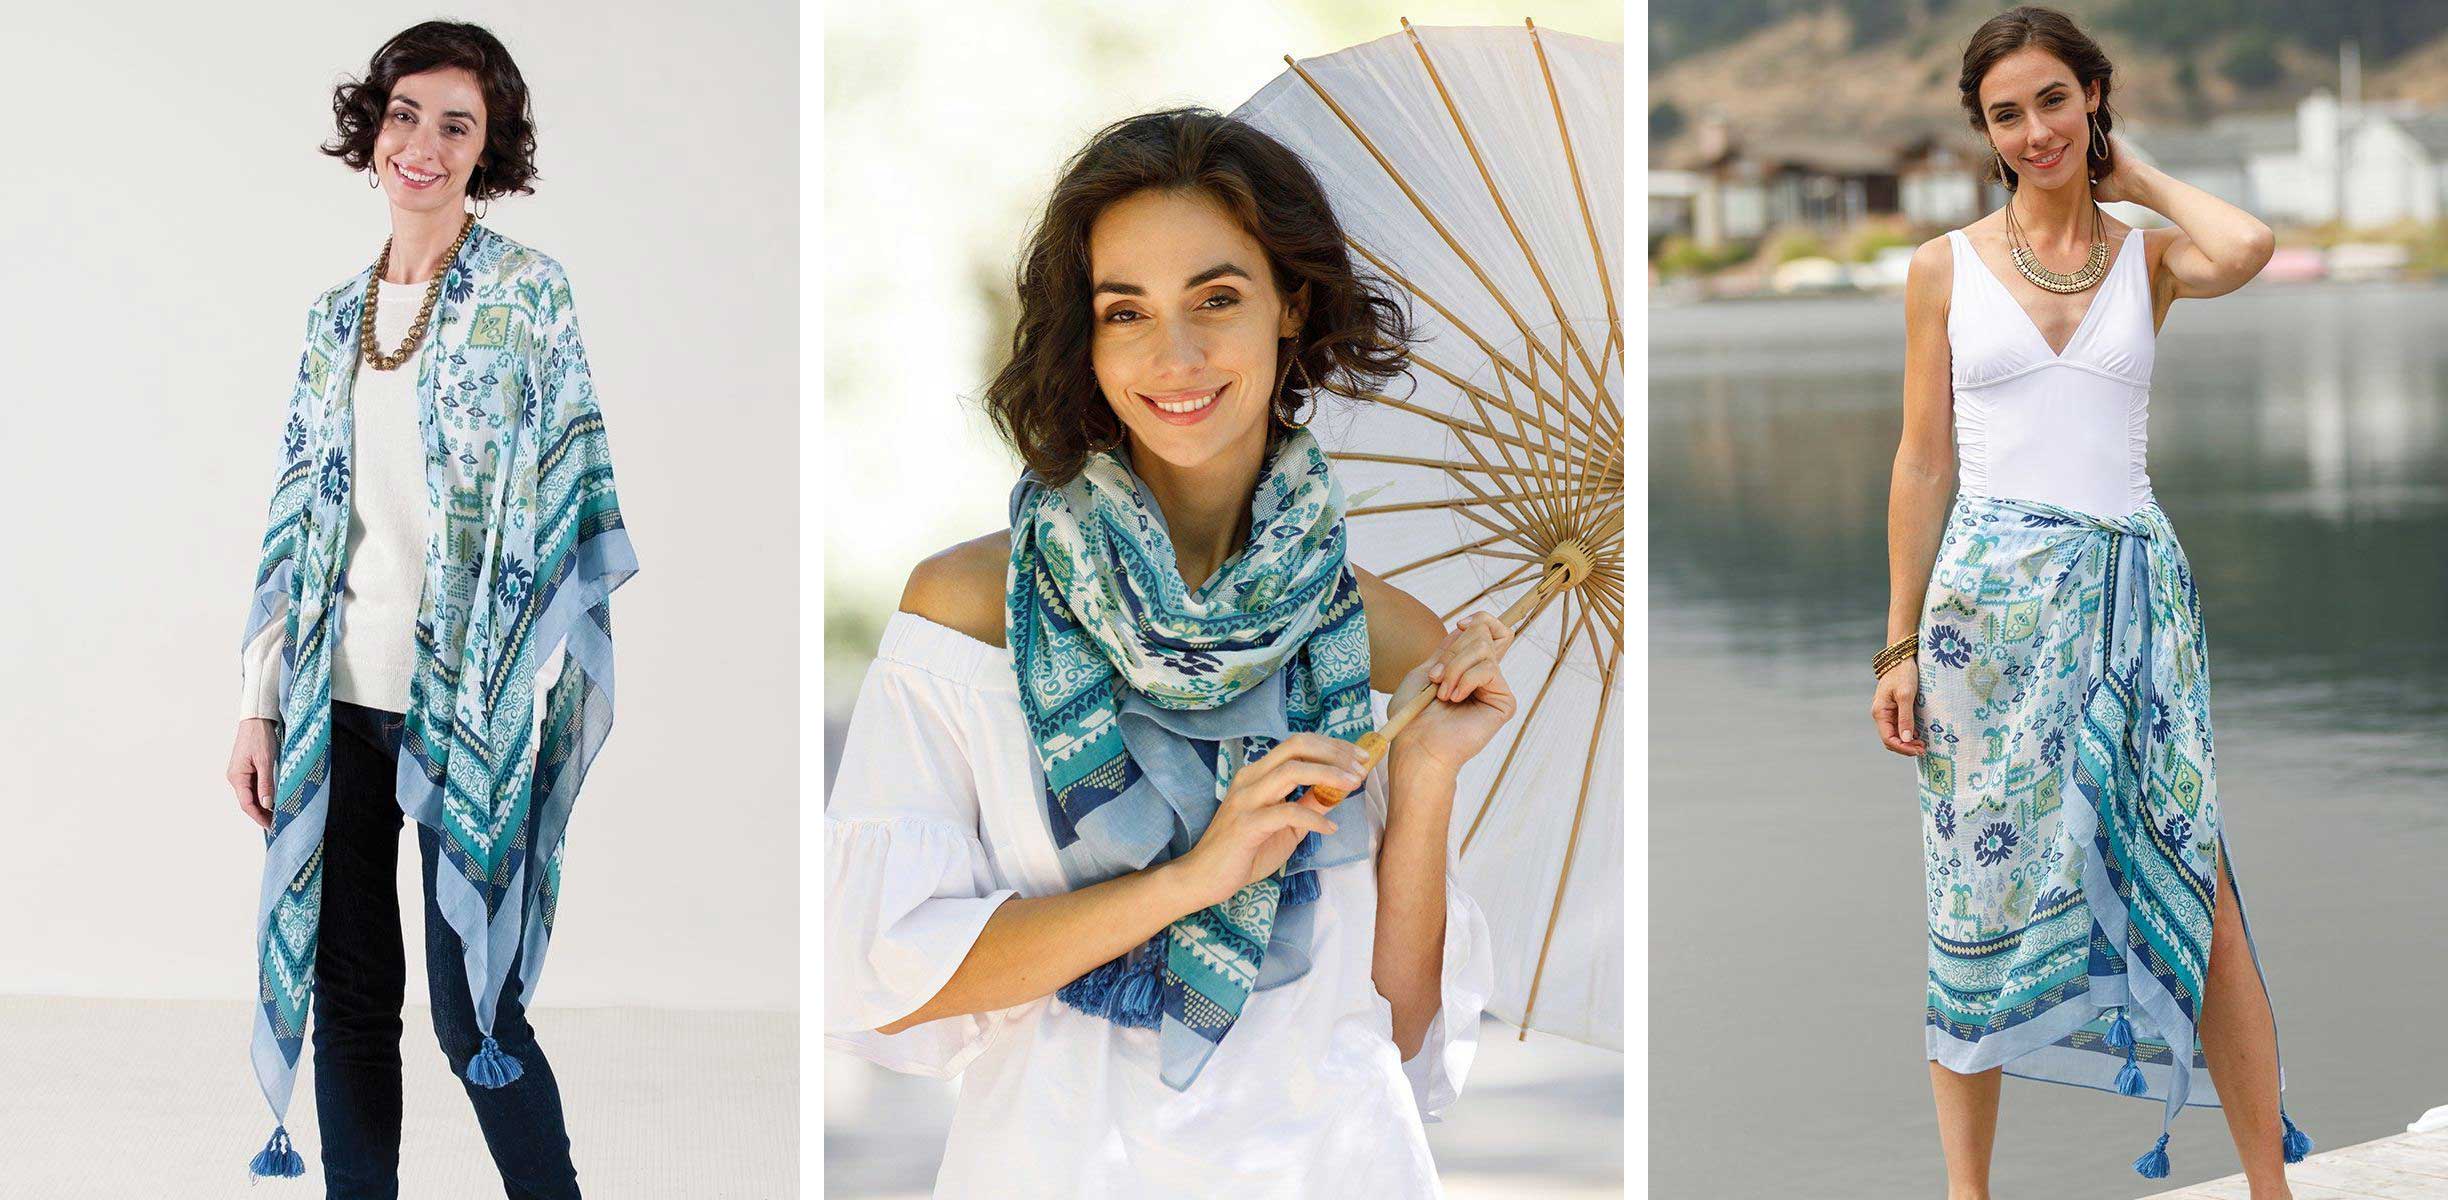 3 photos of a woman wearing the same kimono wrap over a sweater, a white summer shirt, and a white bathingsuit